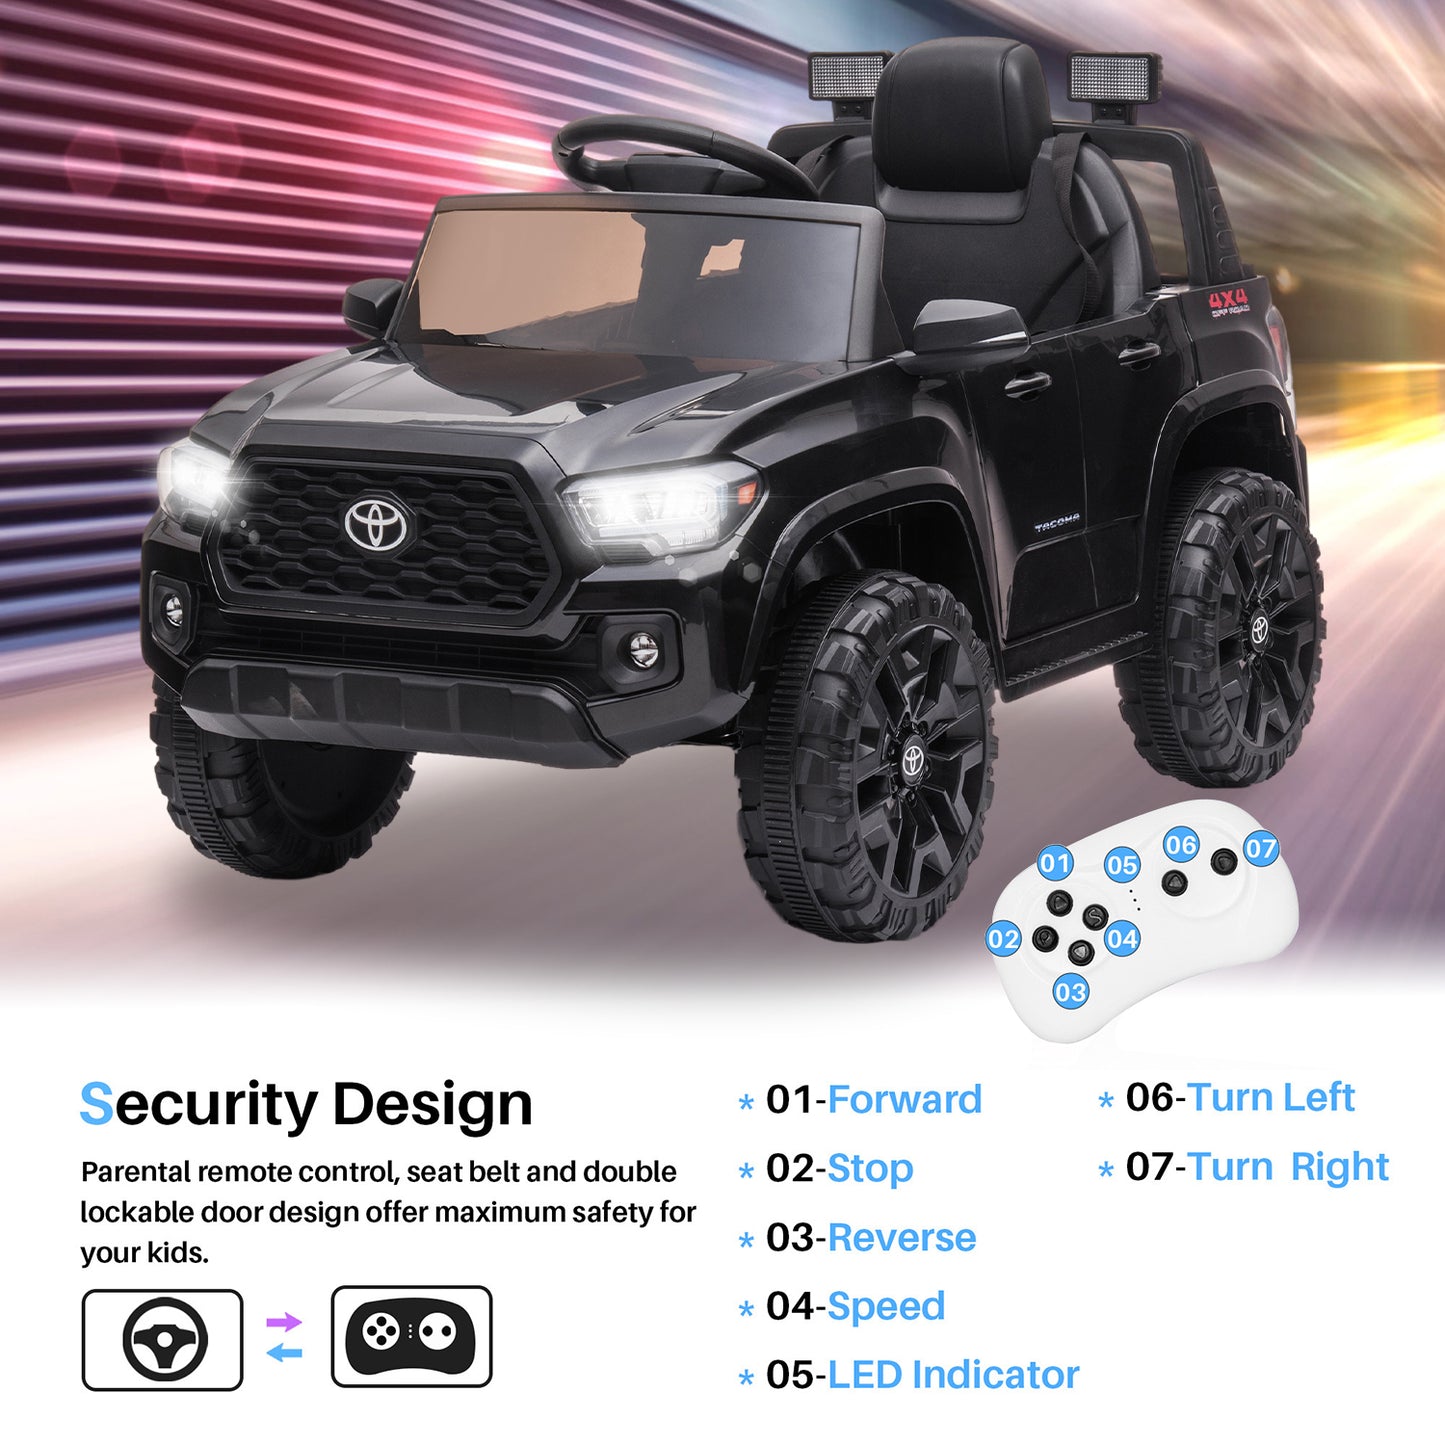 SYNGAR Licensed Toyota Tacoma 12 V Electric Ride on Car for Kids, Black Battery Powered Truck Toy with Remote Control, LED Light and MP3 Player